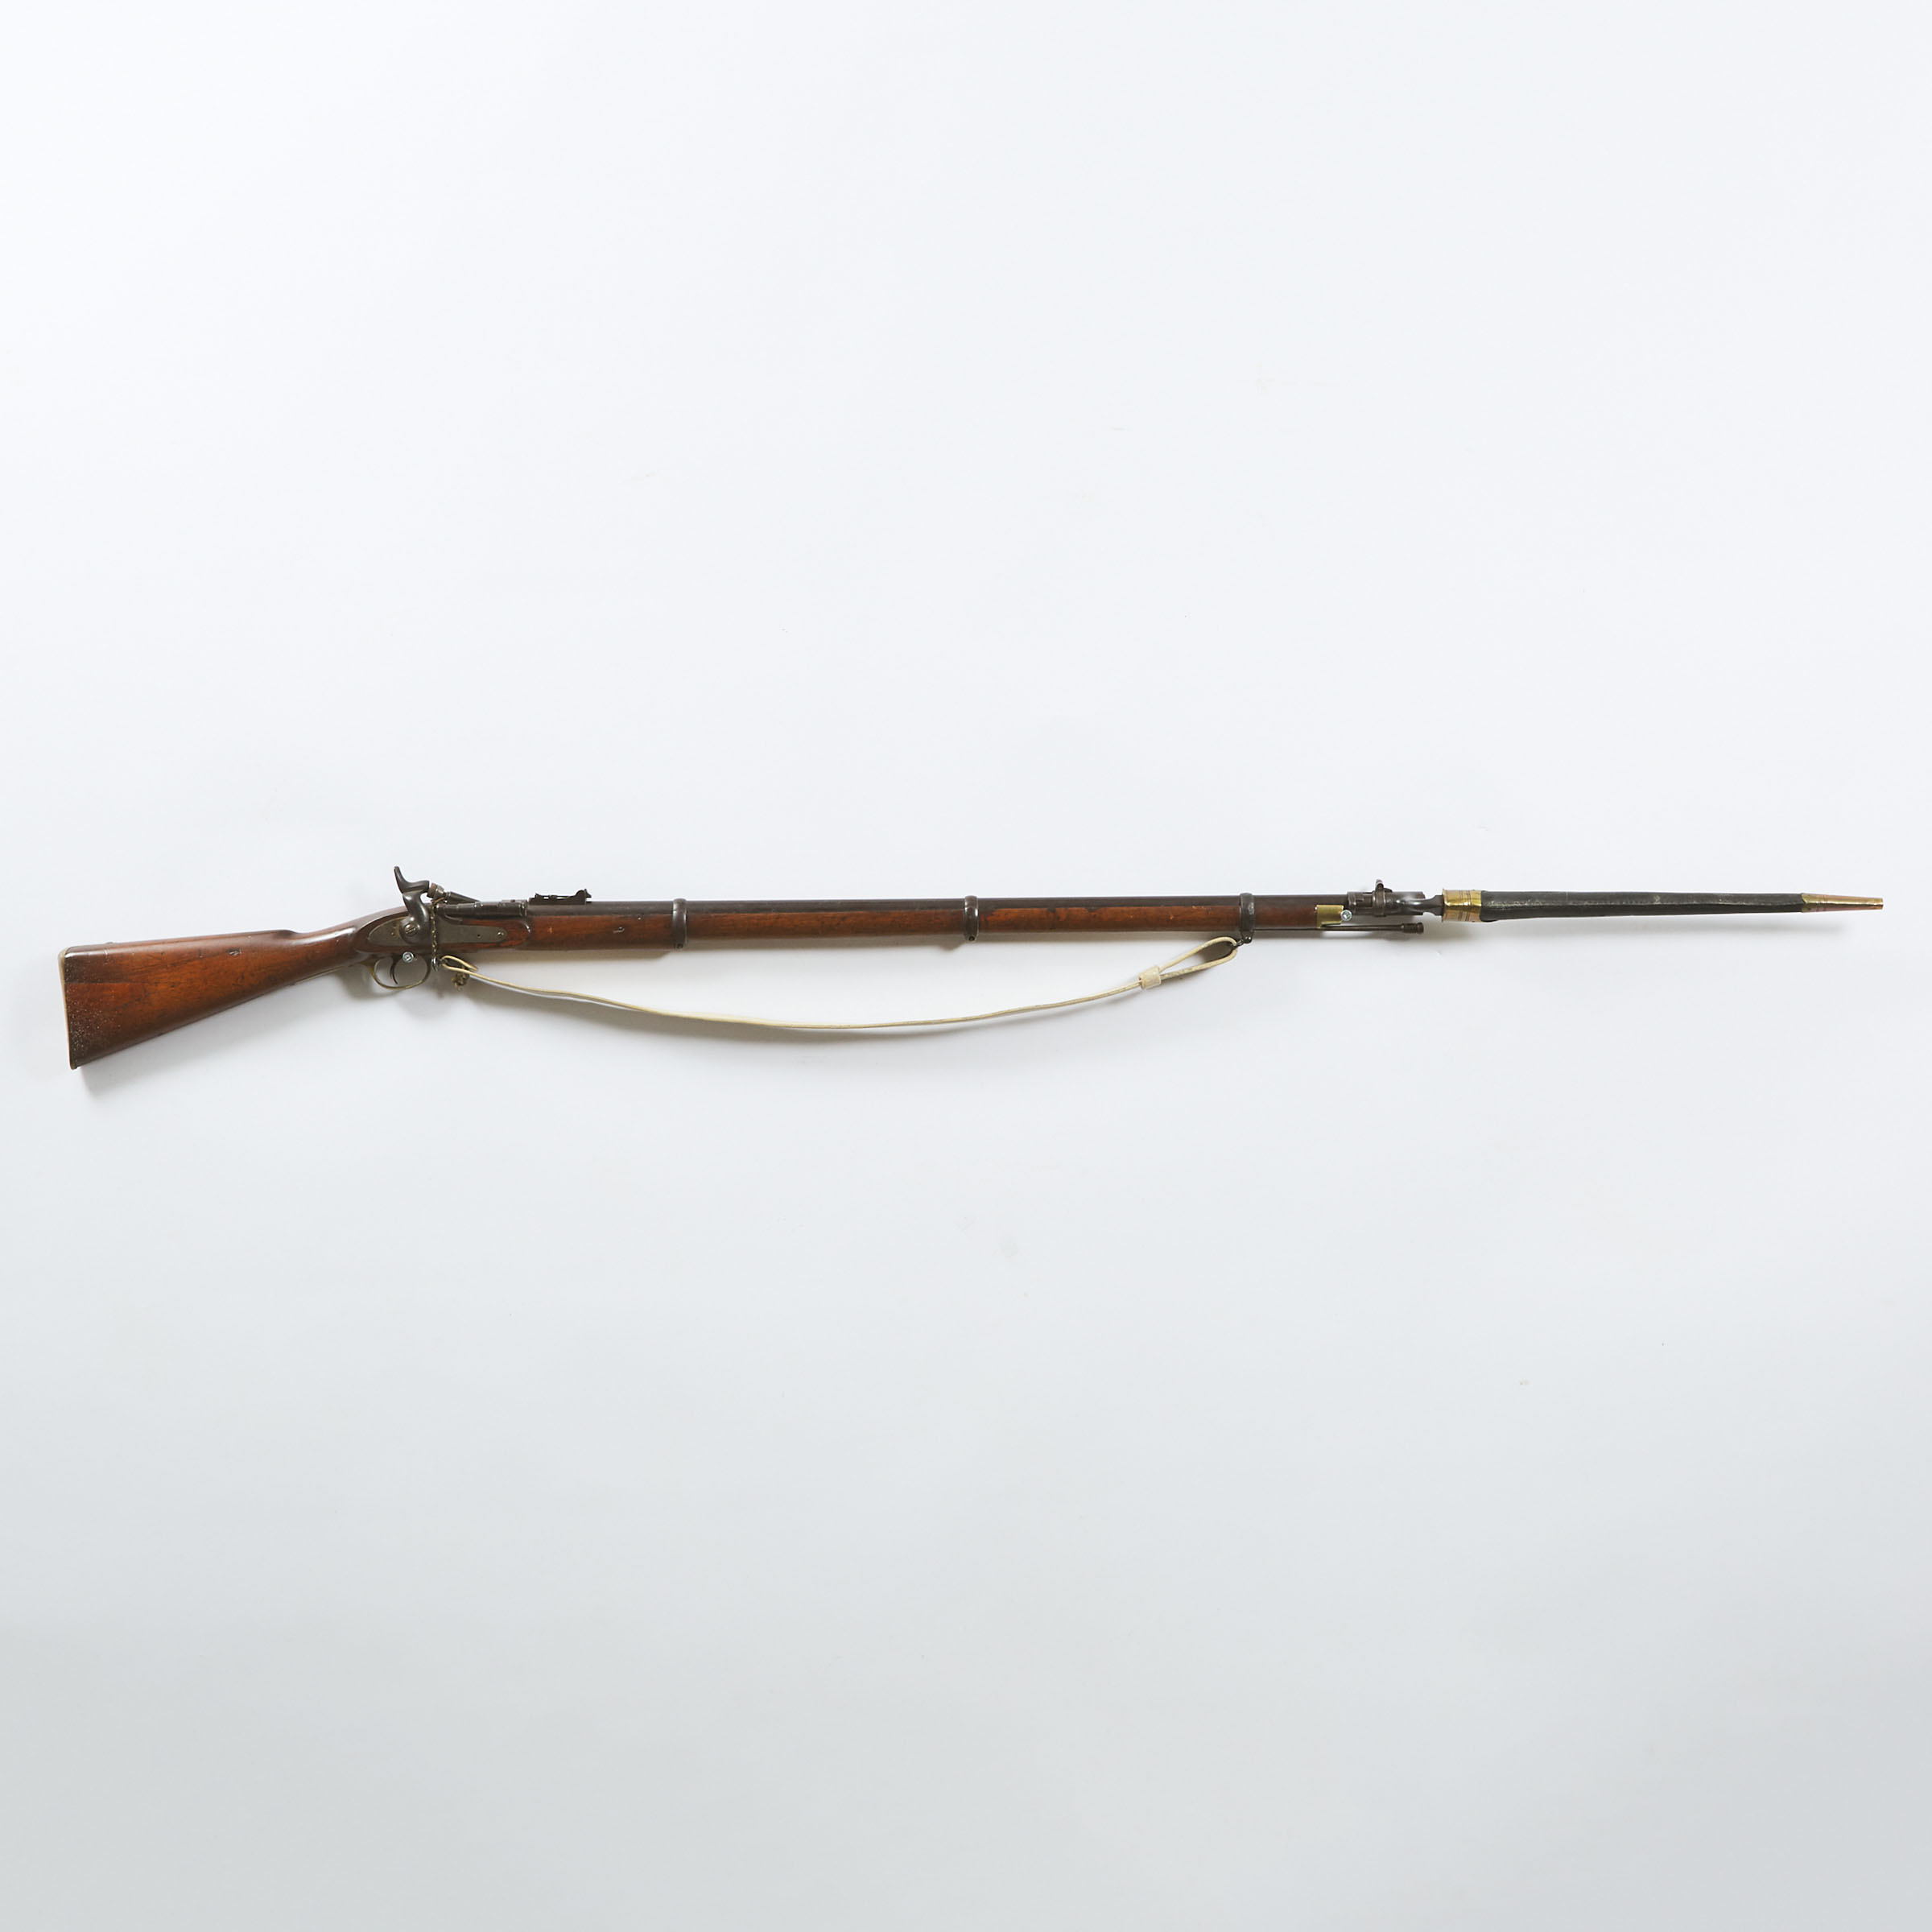 Snider-Enfield Model 1853 Percussion Cap Rifle, London Armoury Company, 1862